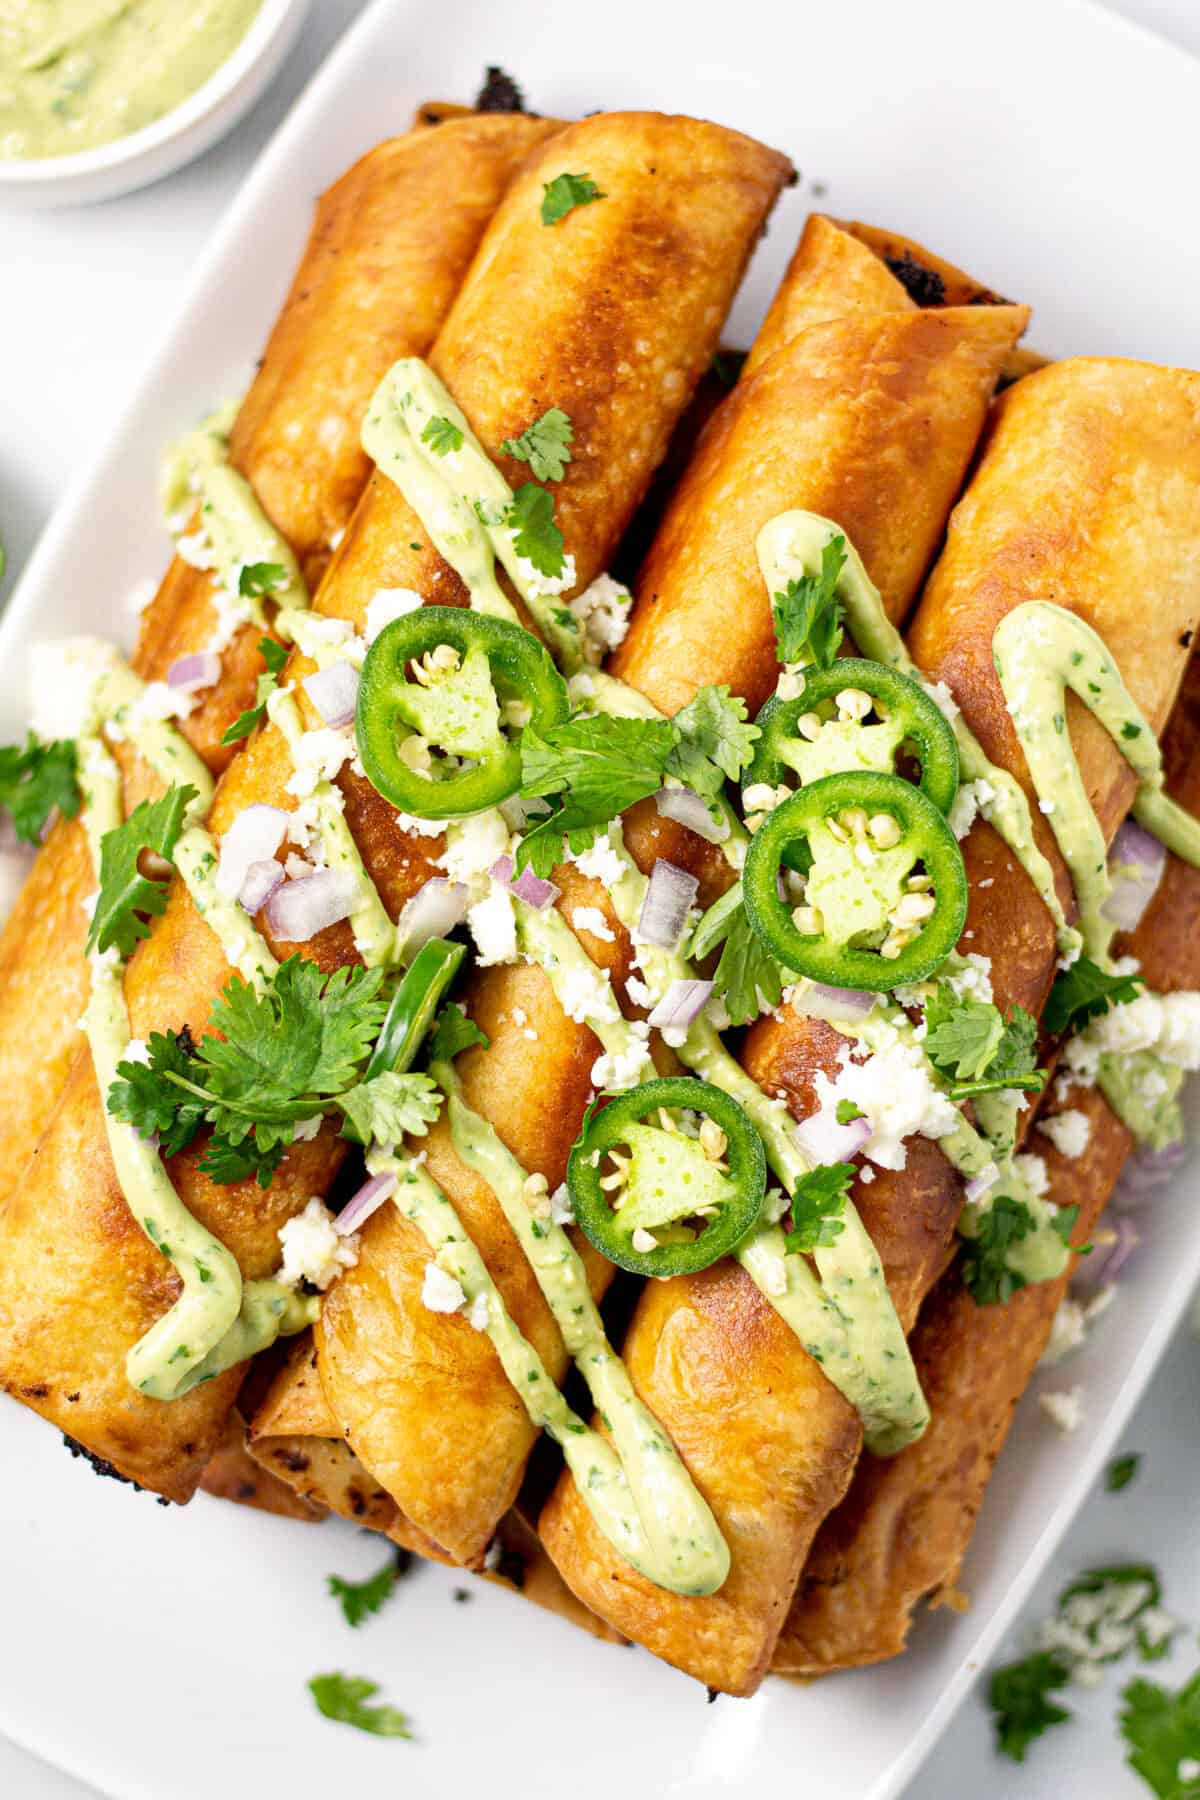 Overhead shot of a platter filled with flautas garnished with cilantro